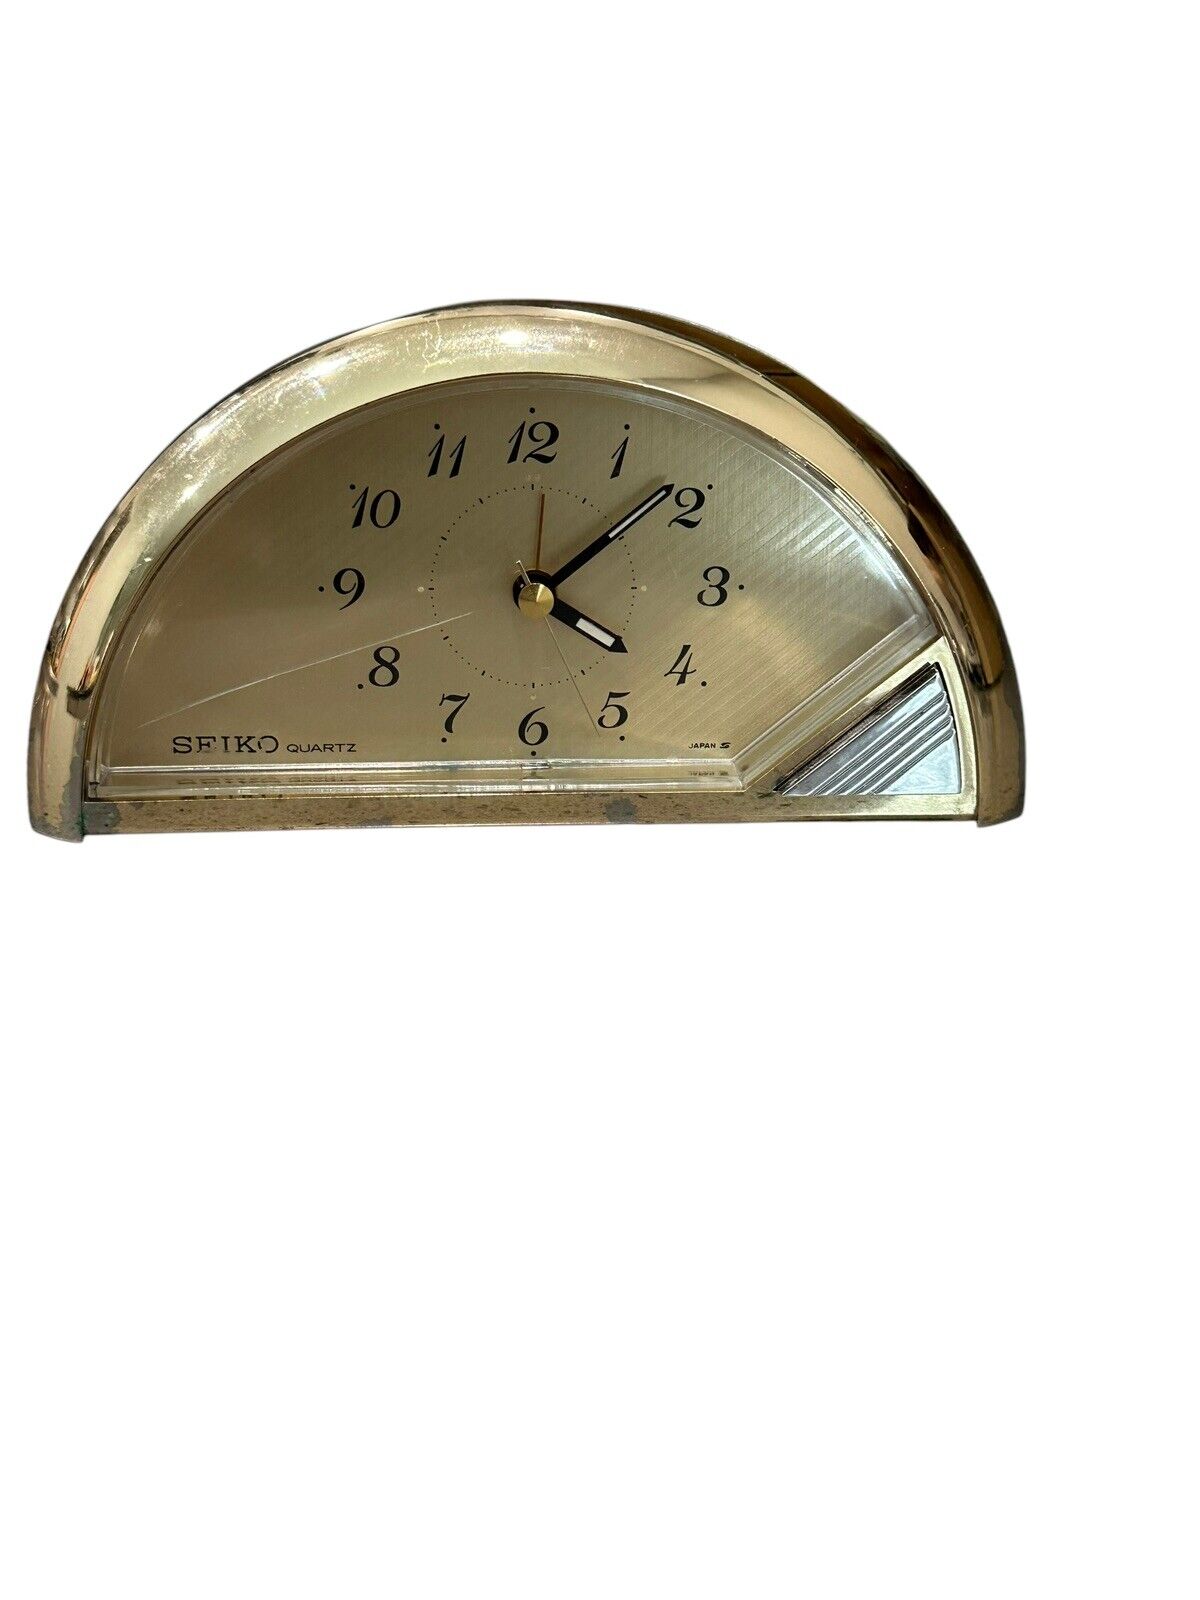 Hollywood Regency Brass Table Clock By SEIKO, Vintage From The 70s